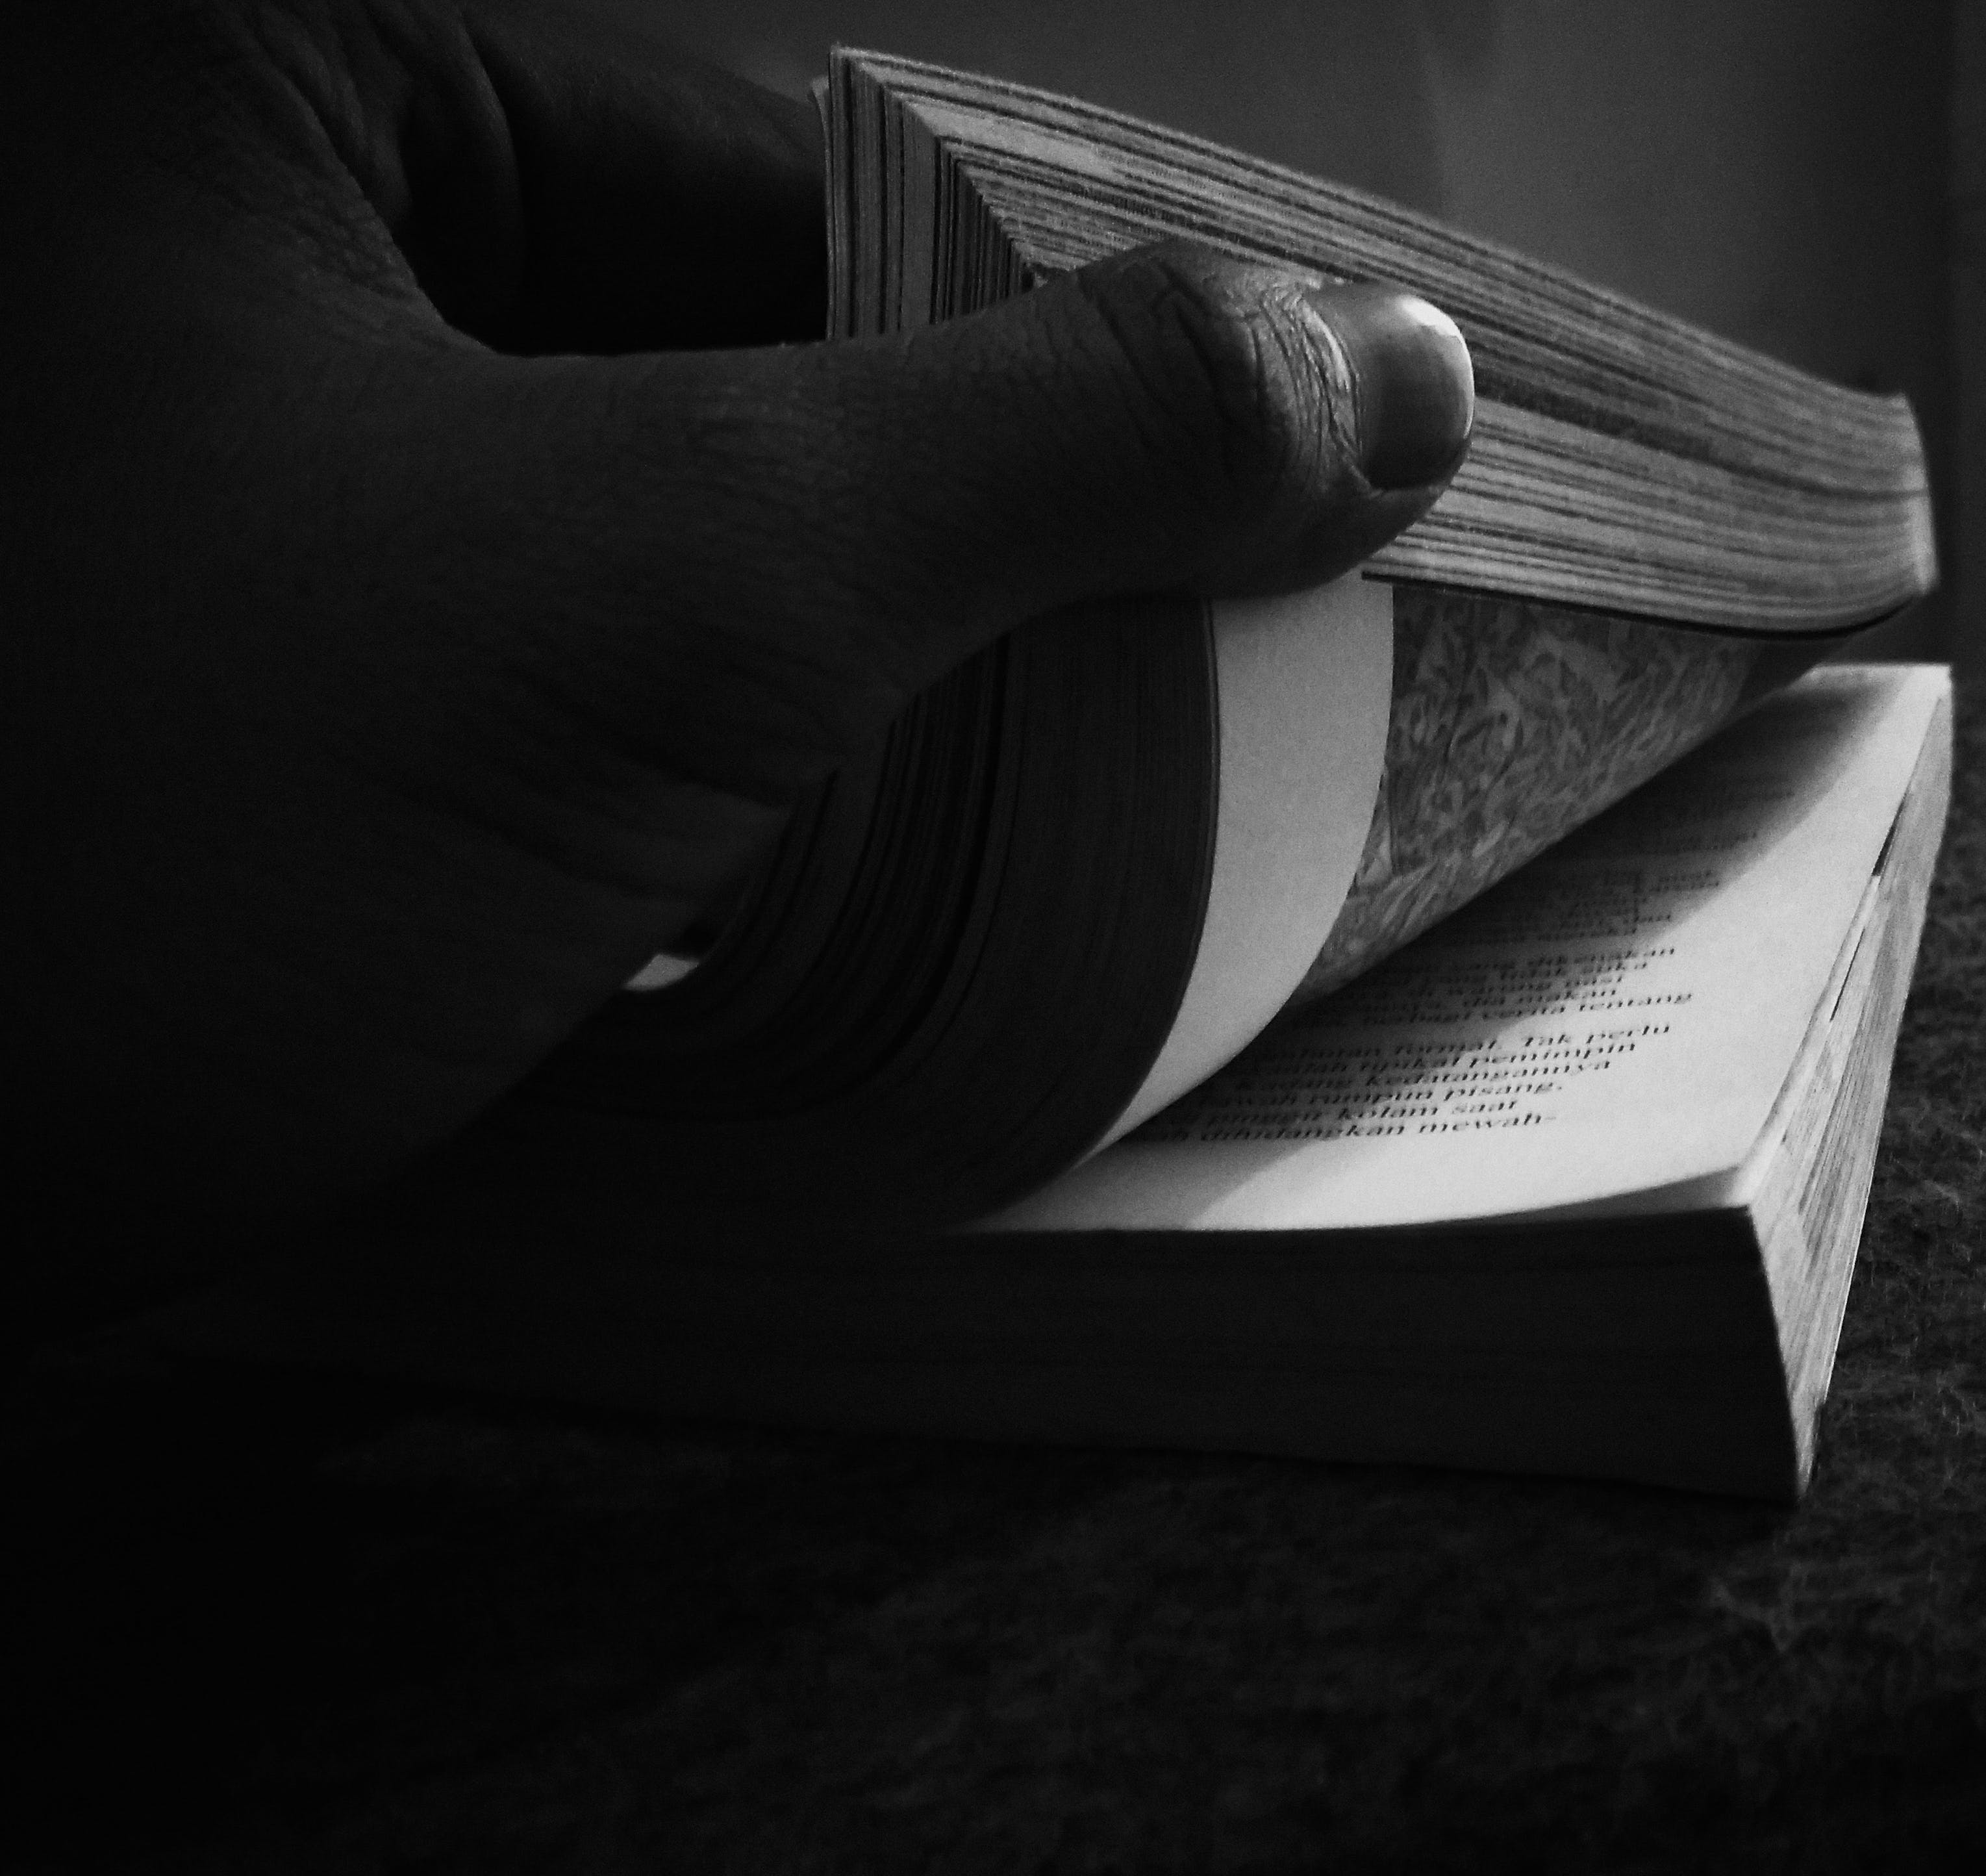 black & white photo of a hand flipping the pages of a corner of a book